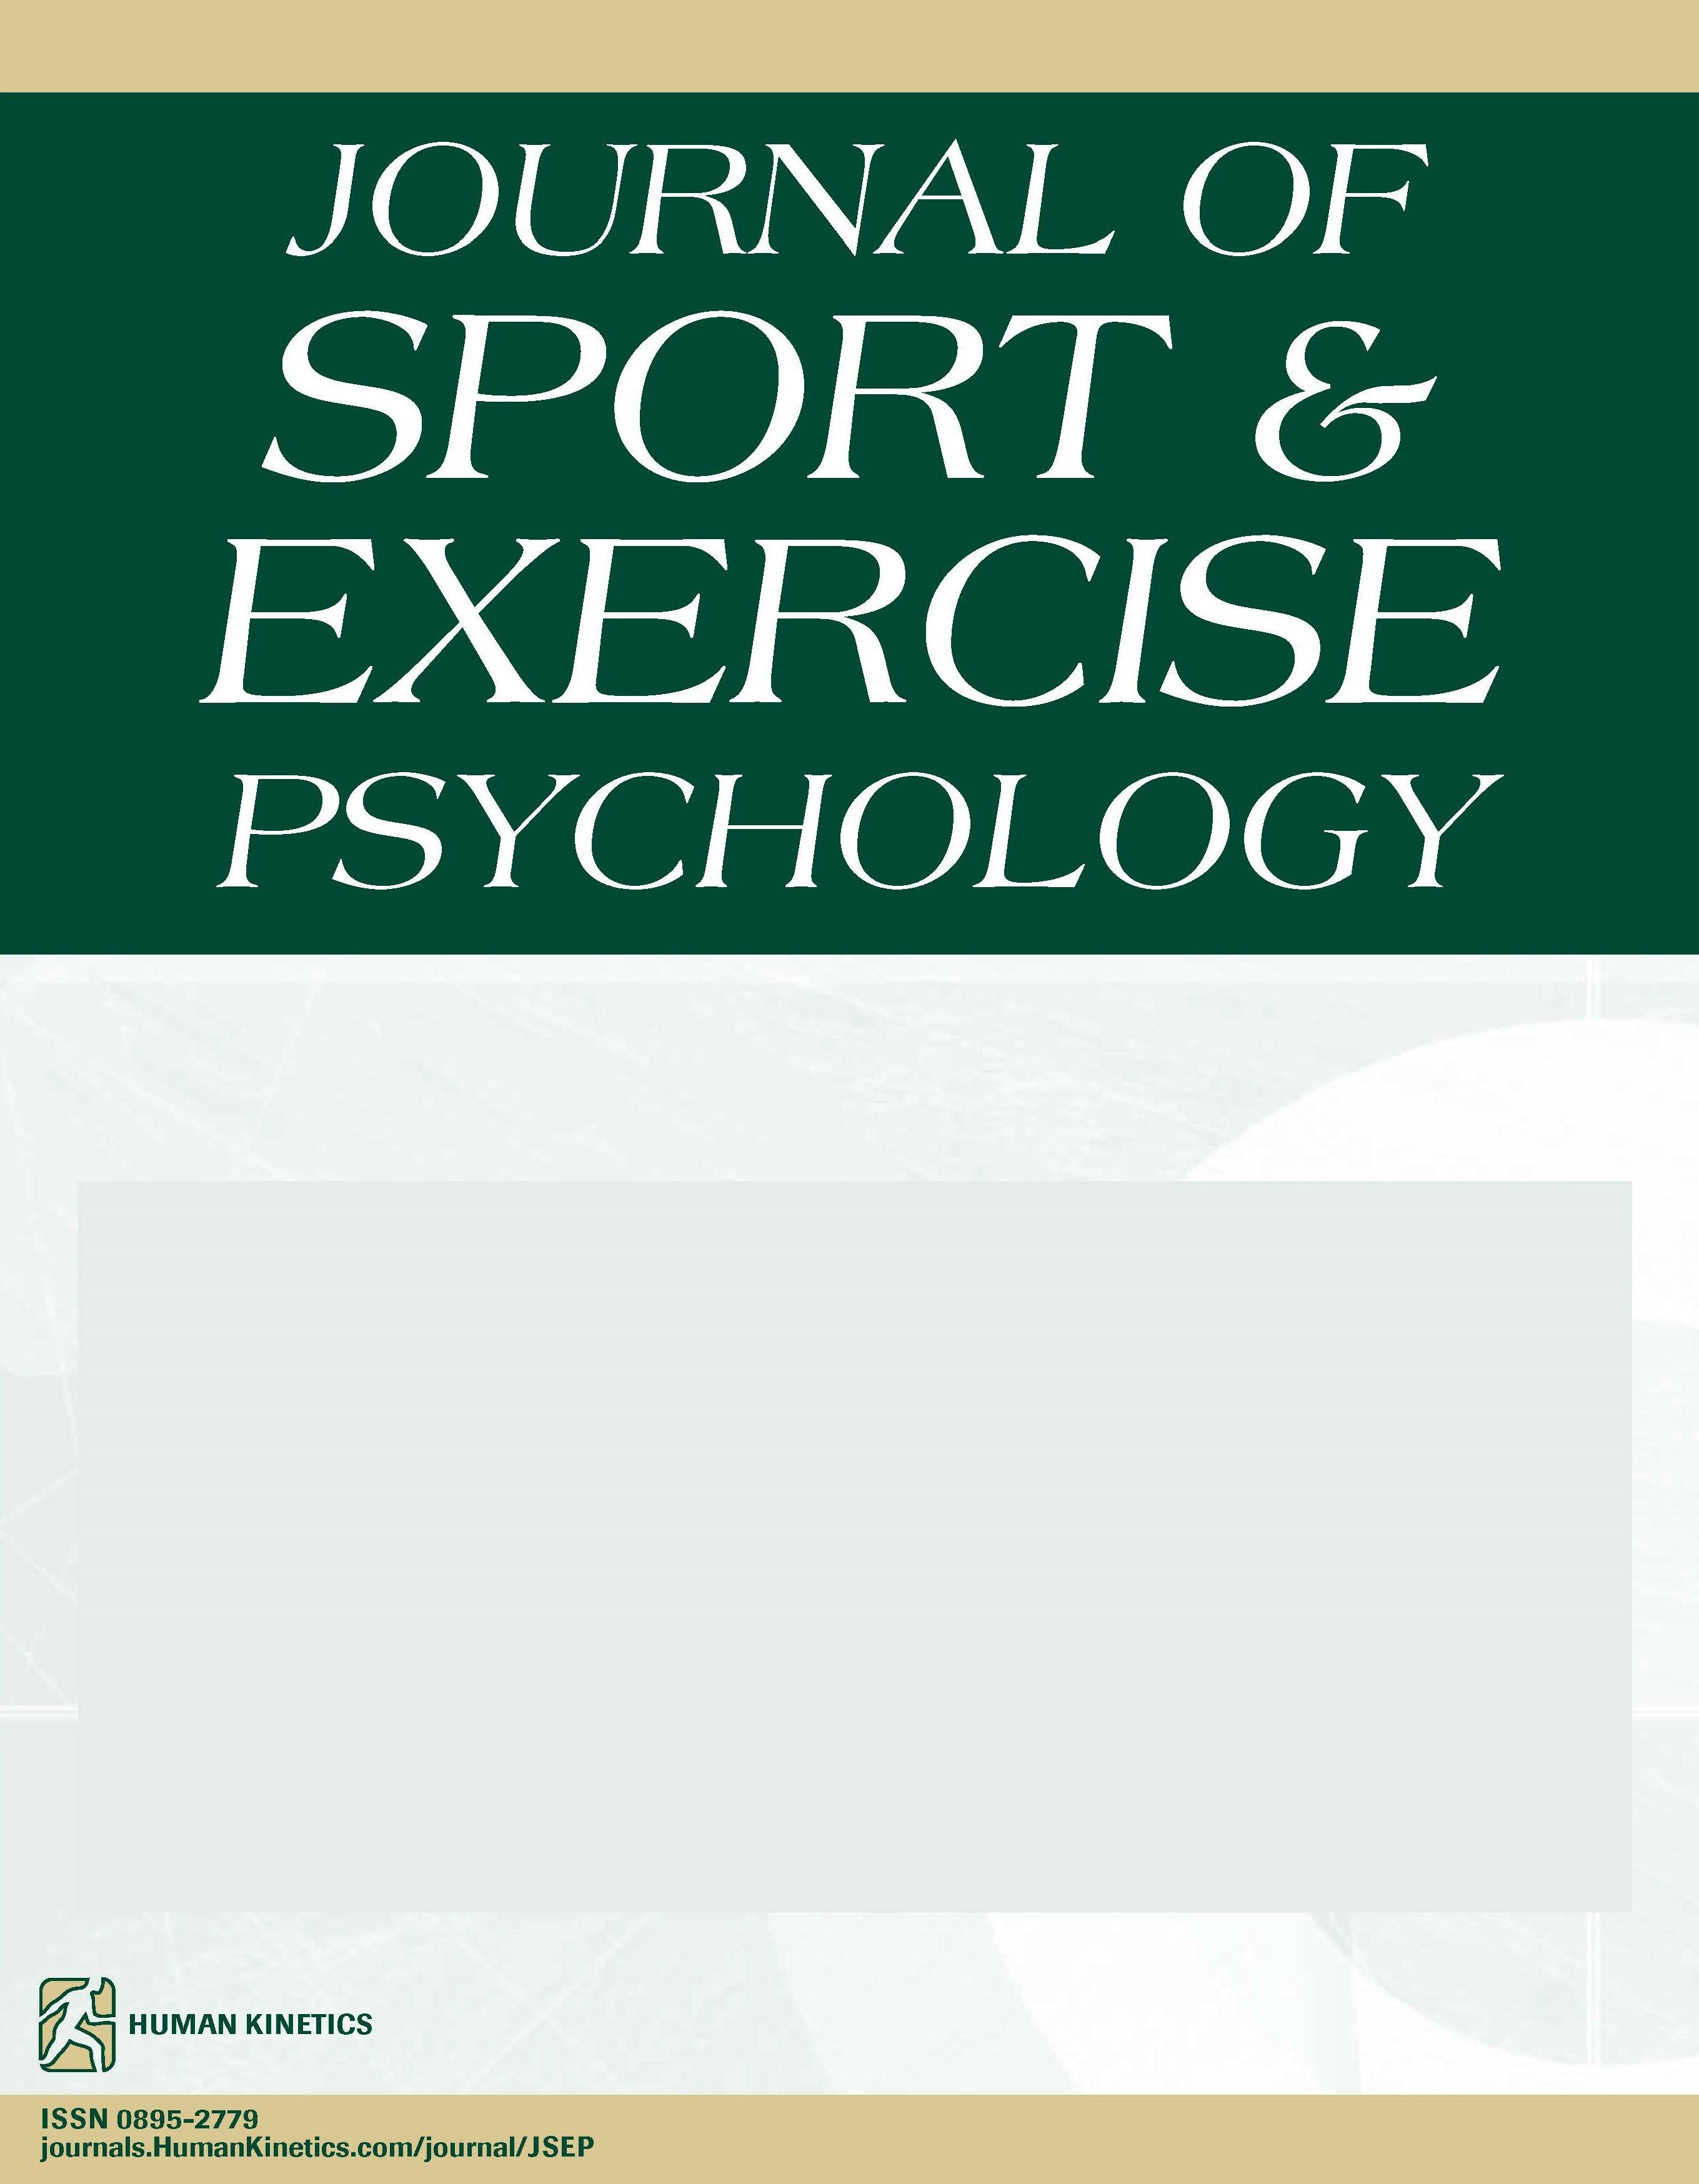 What Influences Children’s Physical Activity? Investigating the Effects of Physical Self-Concept, Physical Self-Guides, Self-Efficacy, and Motivation